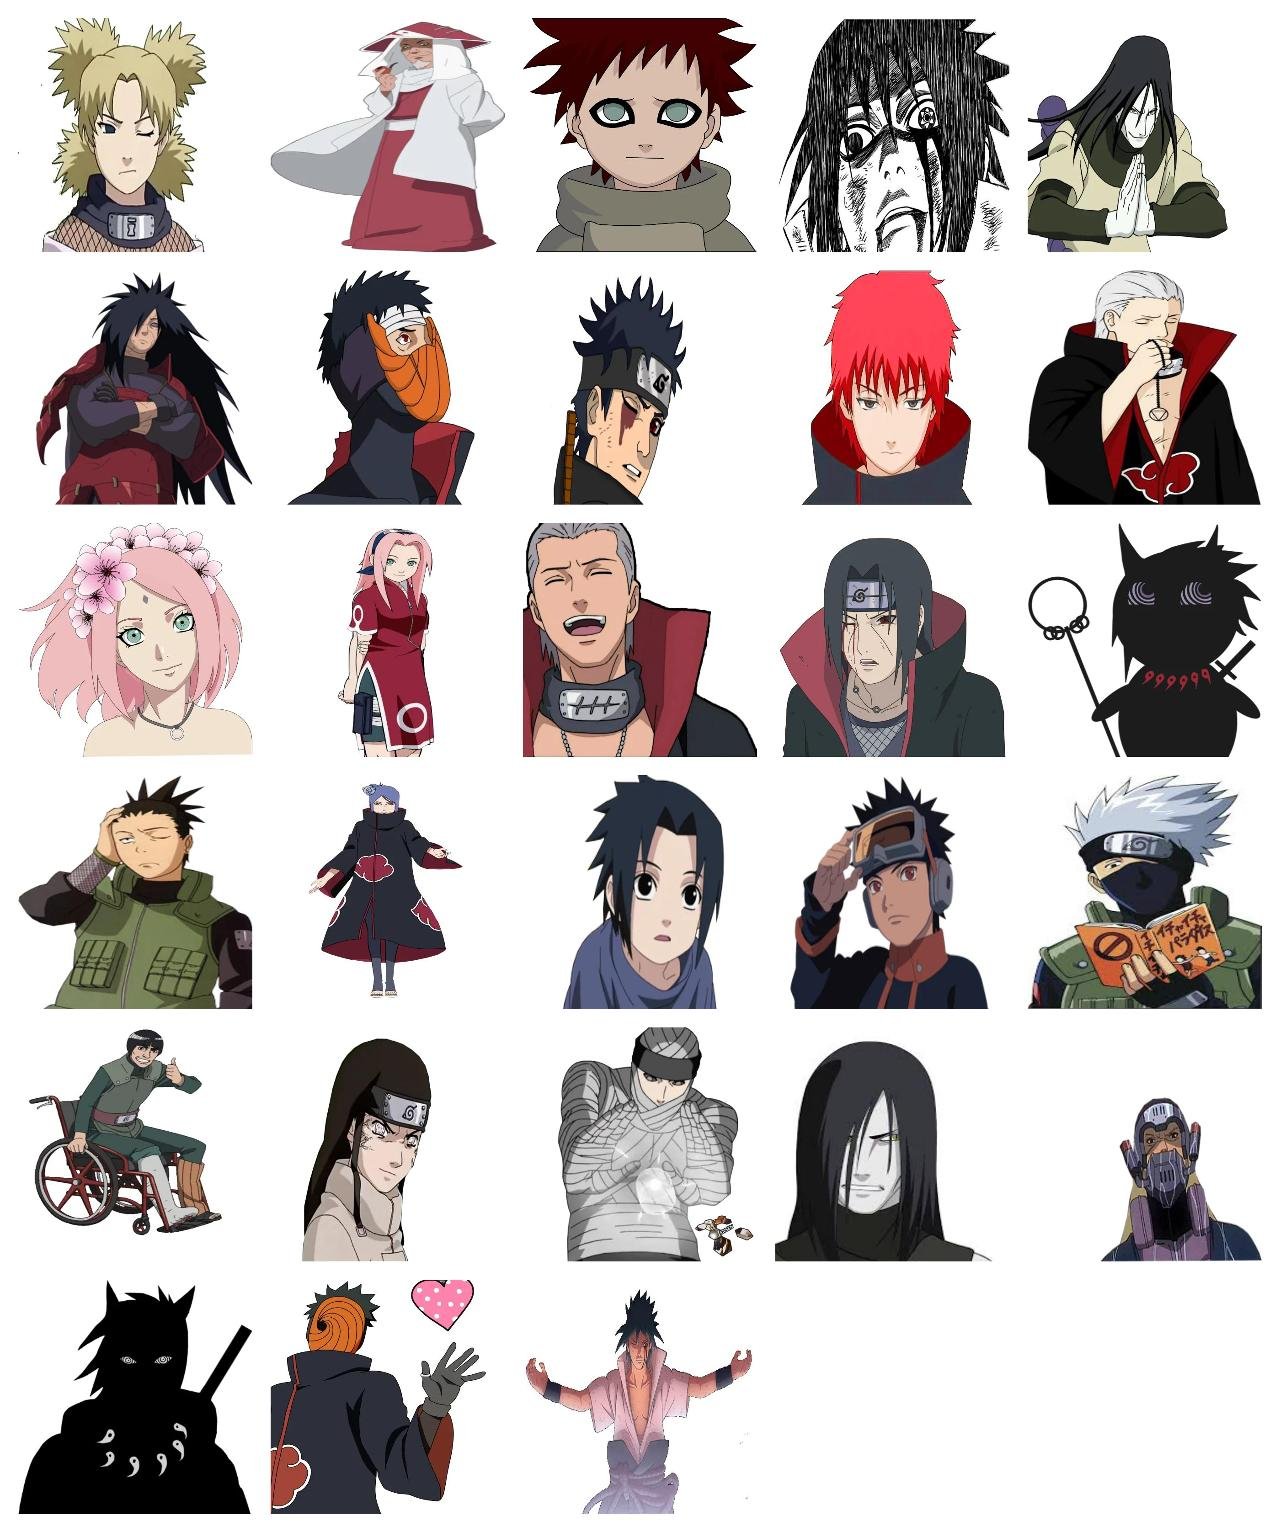 Naruto #5 Naruto sticker pack for Whatsapp, Telegram, Signal, and others chatting and message apps